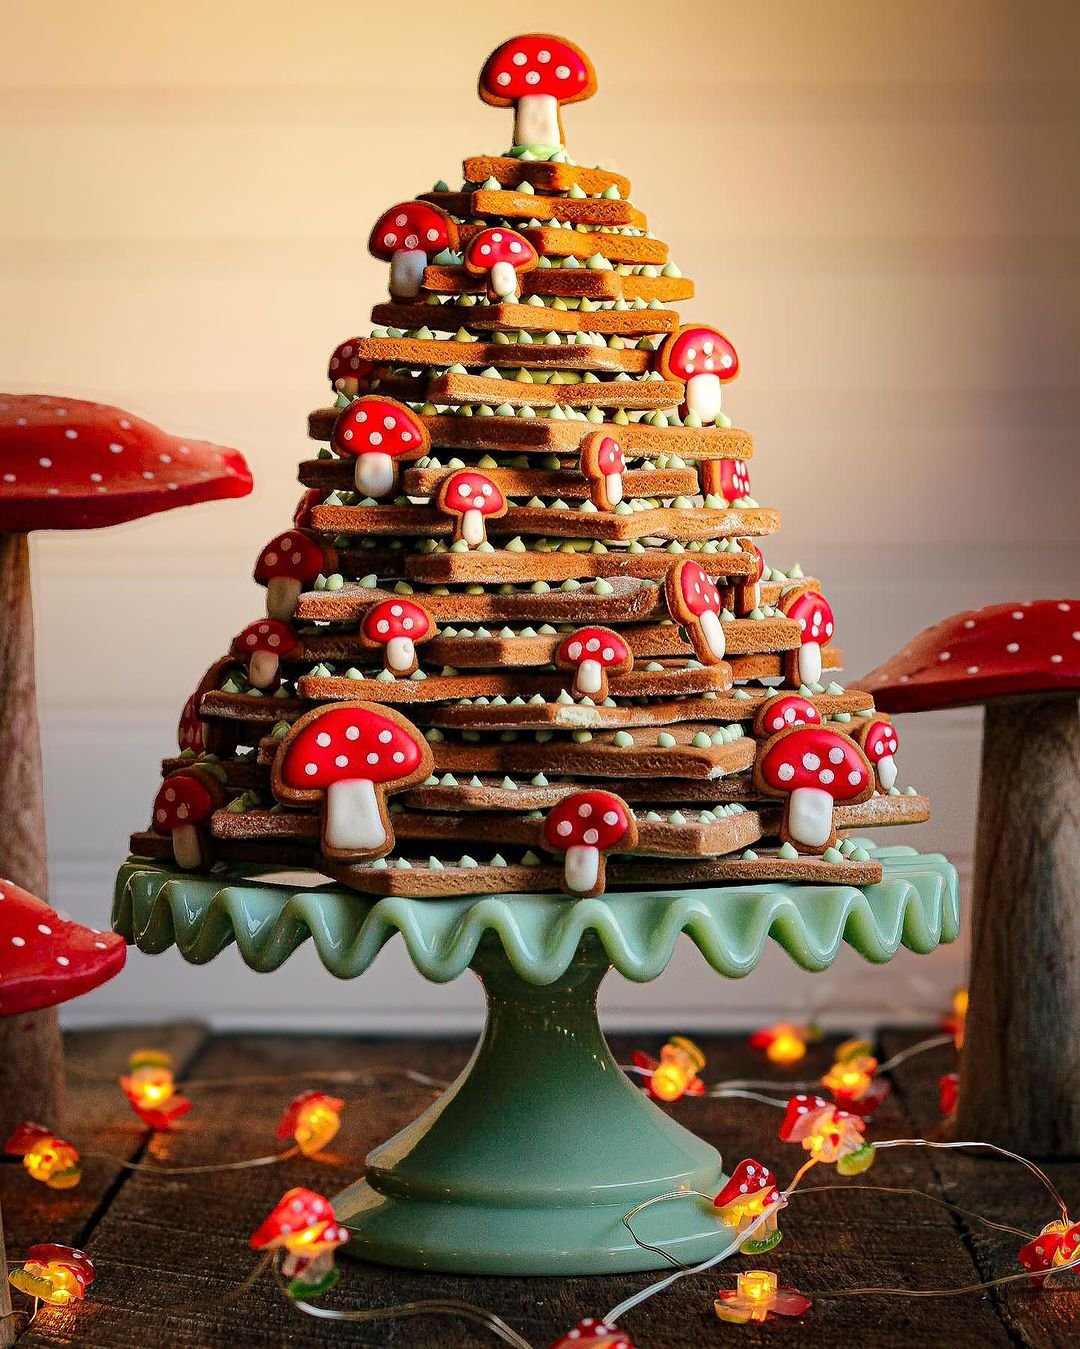 A festive Gingerbread Tree decorated with mushrooms, perfect for the holiday season.